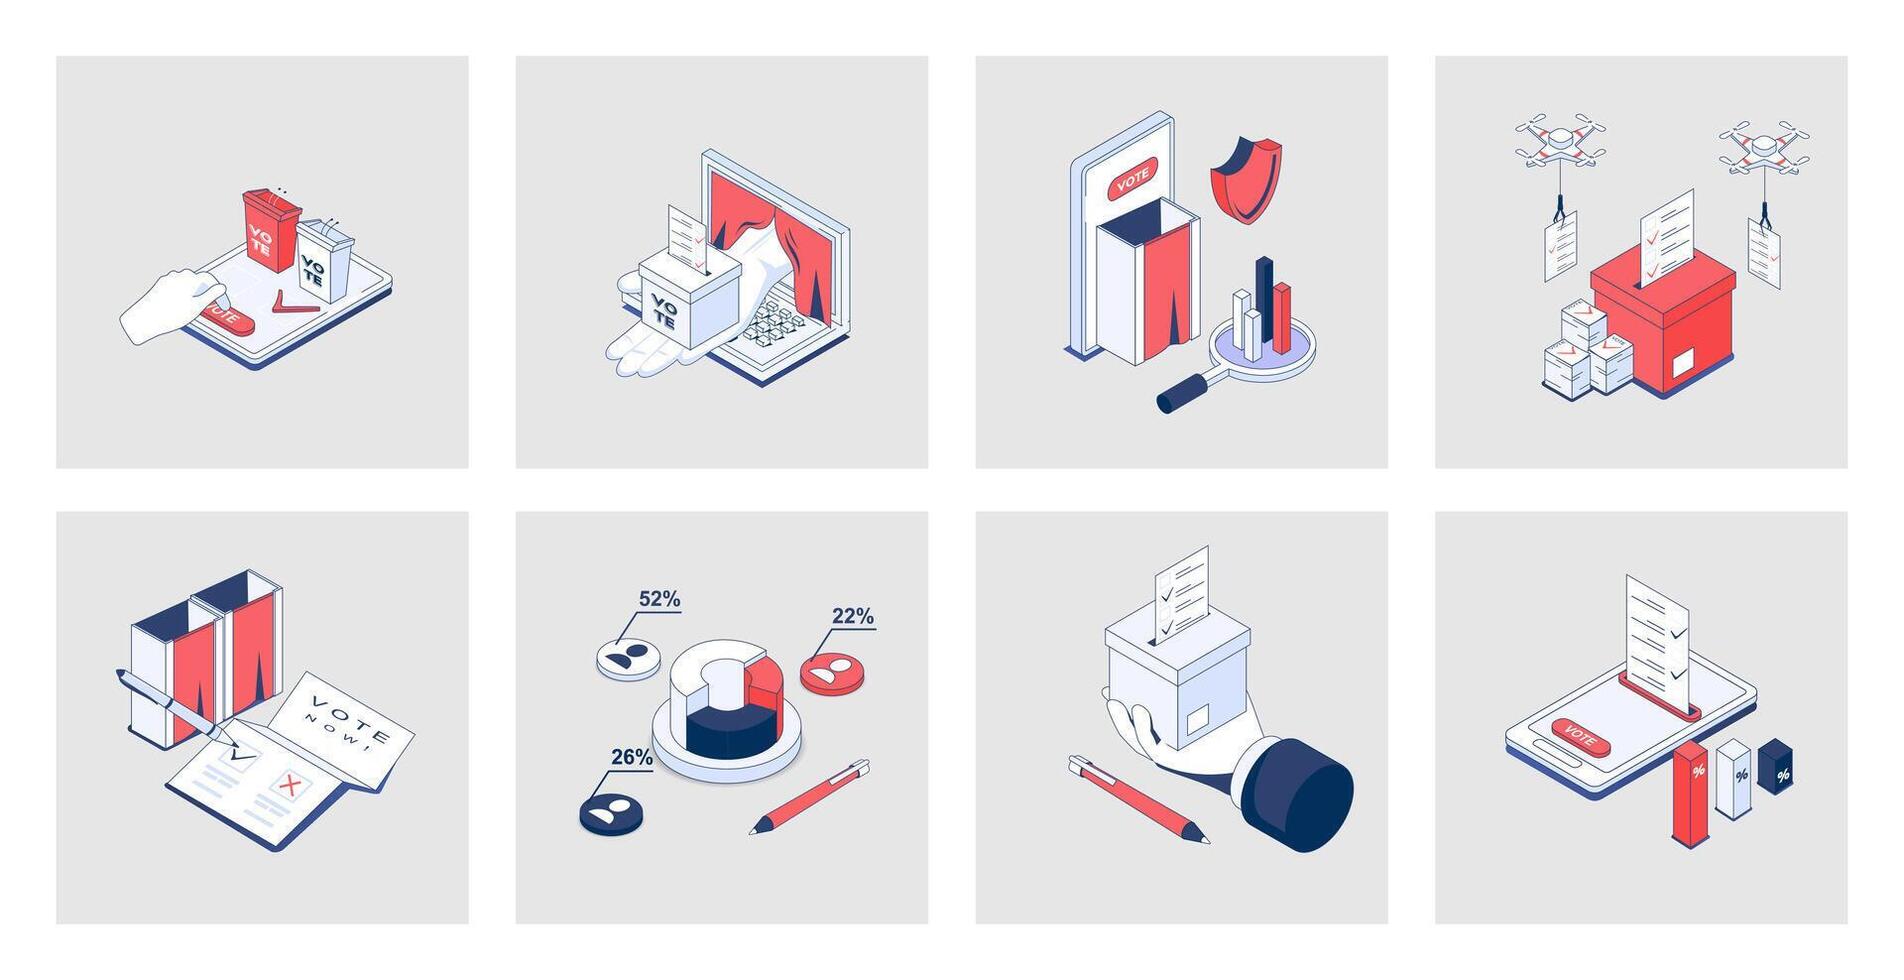 Election and voting concept of isometric icons in 3d isometry design for web. Online vote system, democratic choice, candidate support, political ratings, democracy and politic. Vector illustration